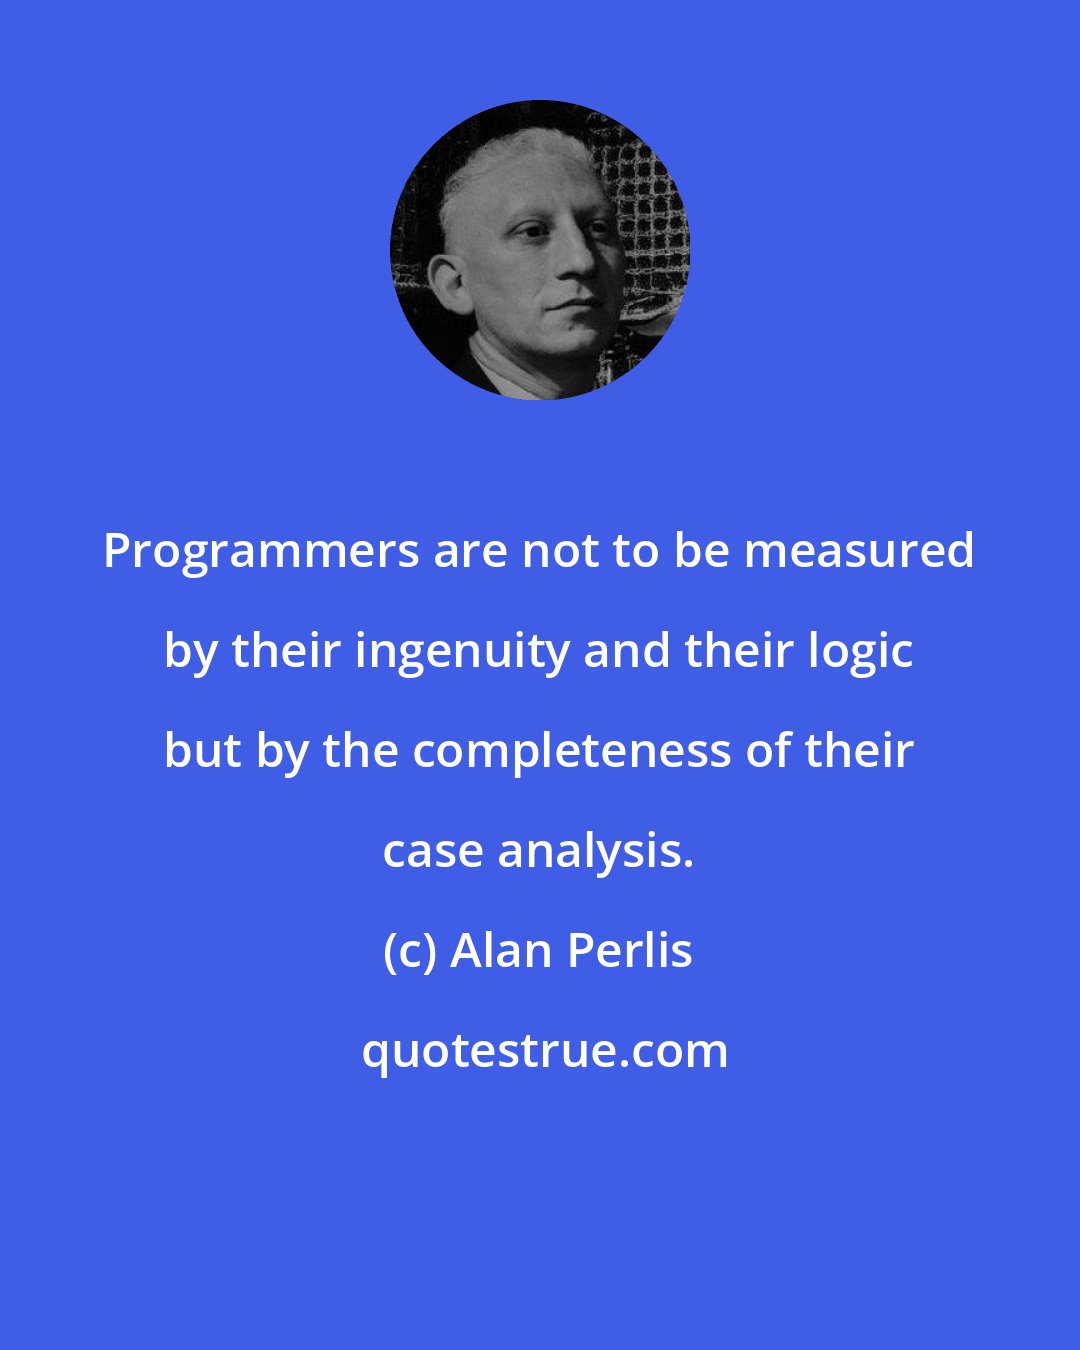 Alan Perlis: Programmers are not to be measured by their ingenuity and their logic but by the completeness of their case analysis.